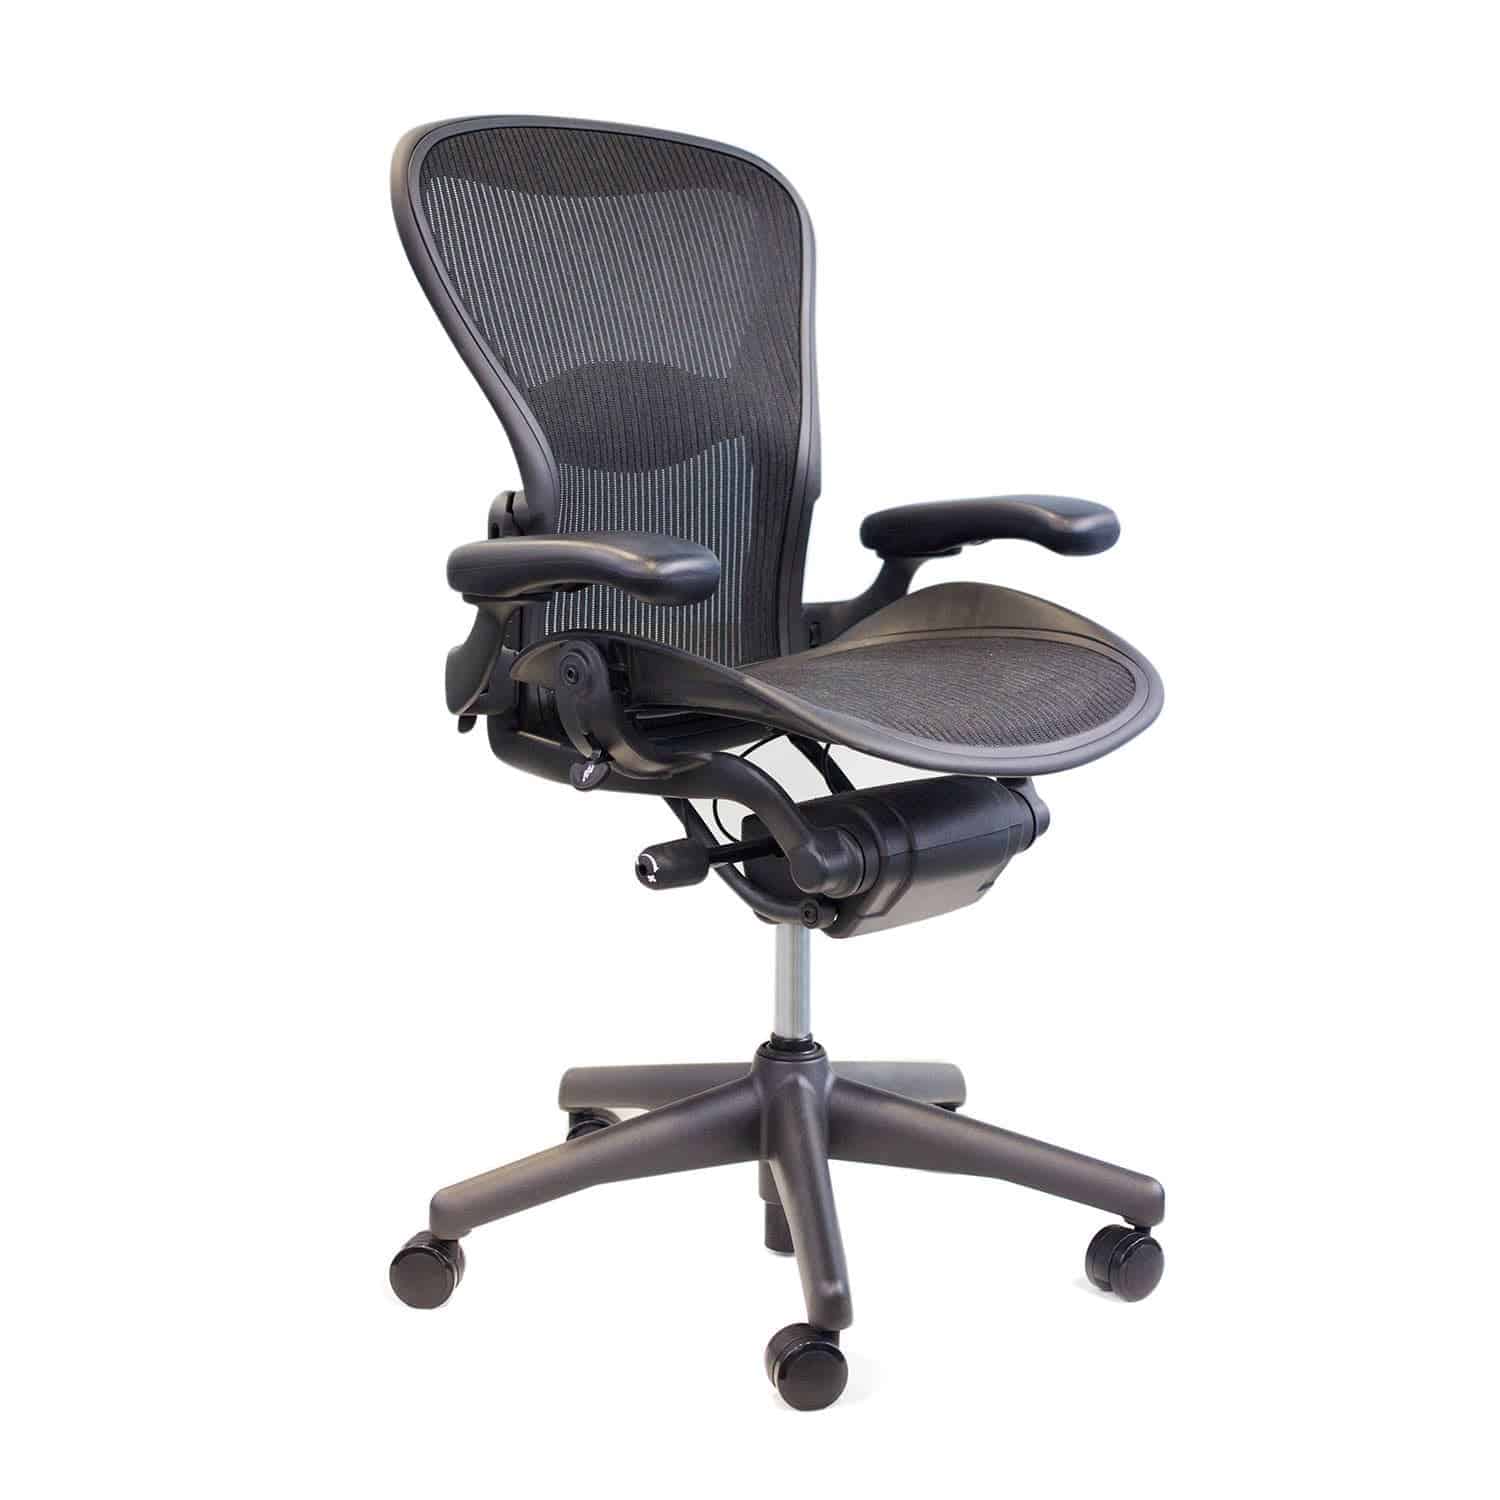 Herman Miller Aeron Chair Used Office Furniture Chicago Store Cubicle Concepts